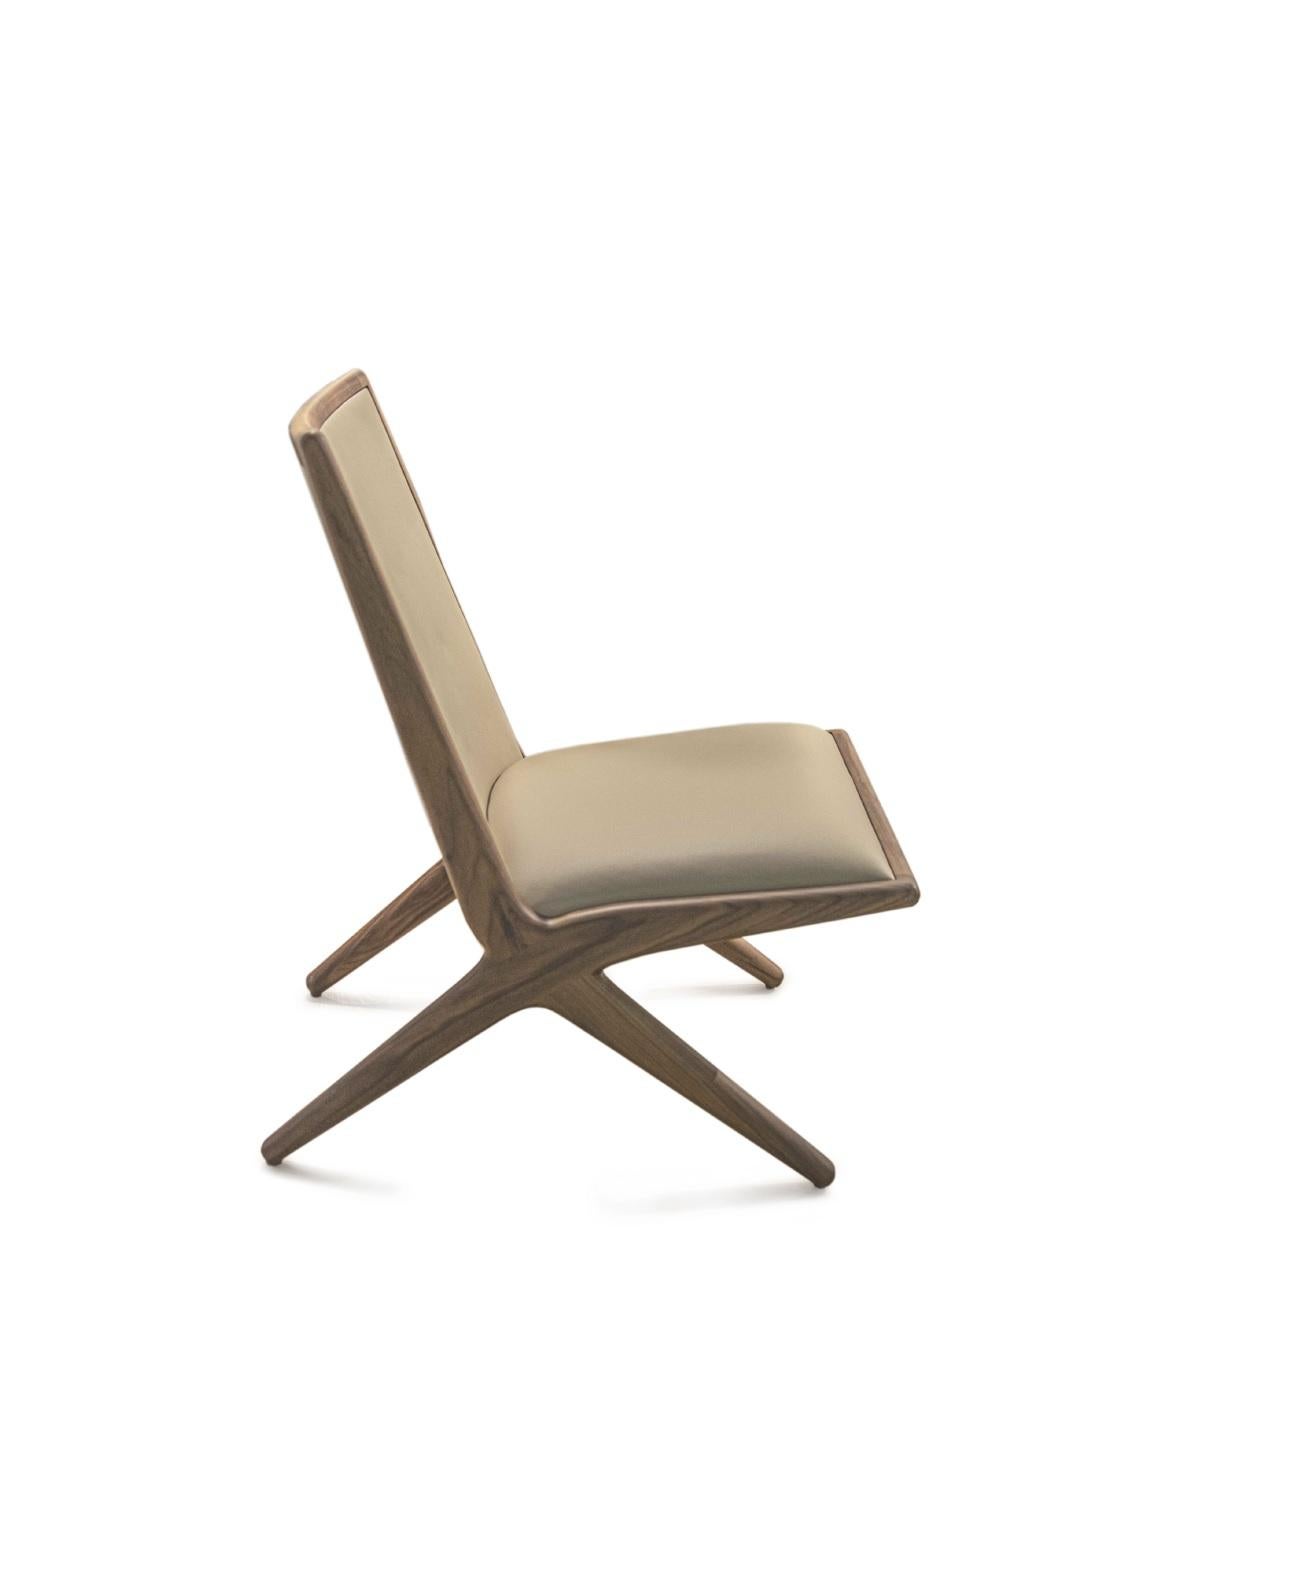 Walnut structure Kaya lounge chair by LK Edition.
Dimensions: 75.7 x 68 x H 86.3 cm.
Materials: walnut. 
Only the structure, no fabric. 
Also available in oak and upholstered with leather.

It is with the sense of detail and requirement, this